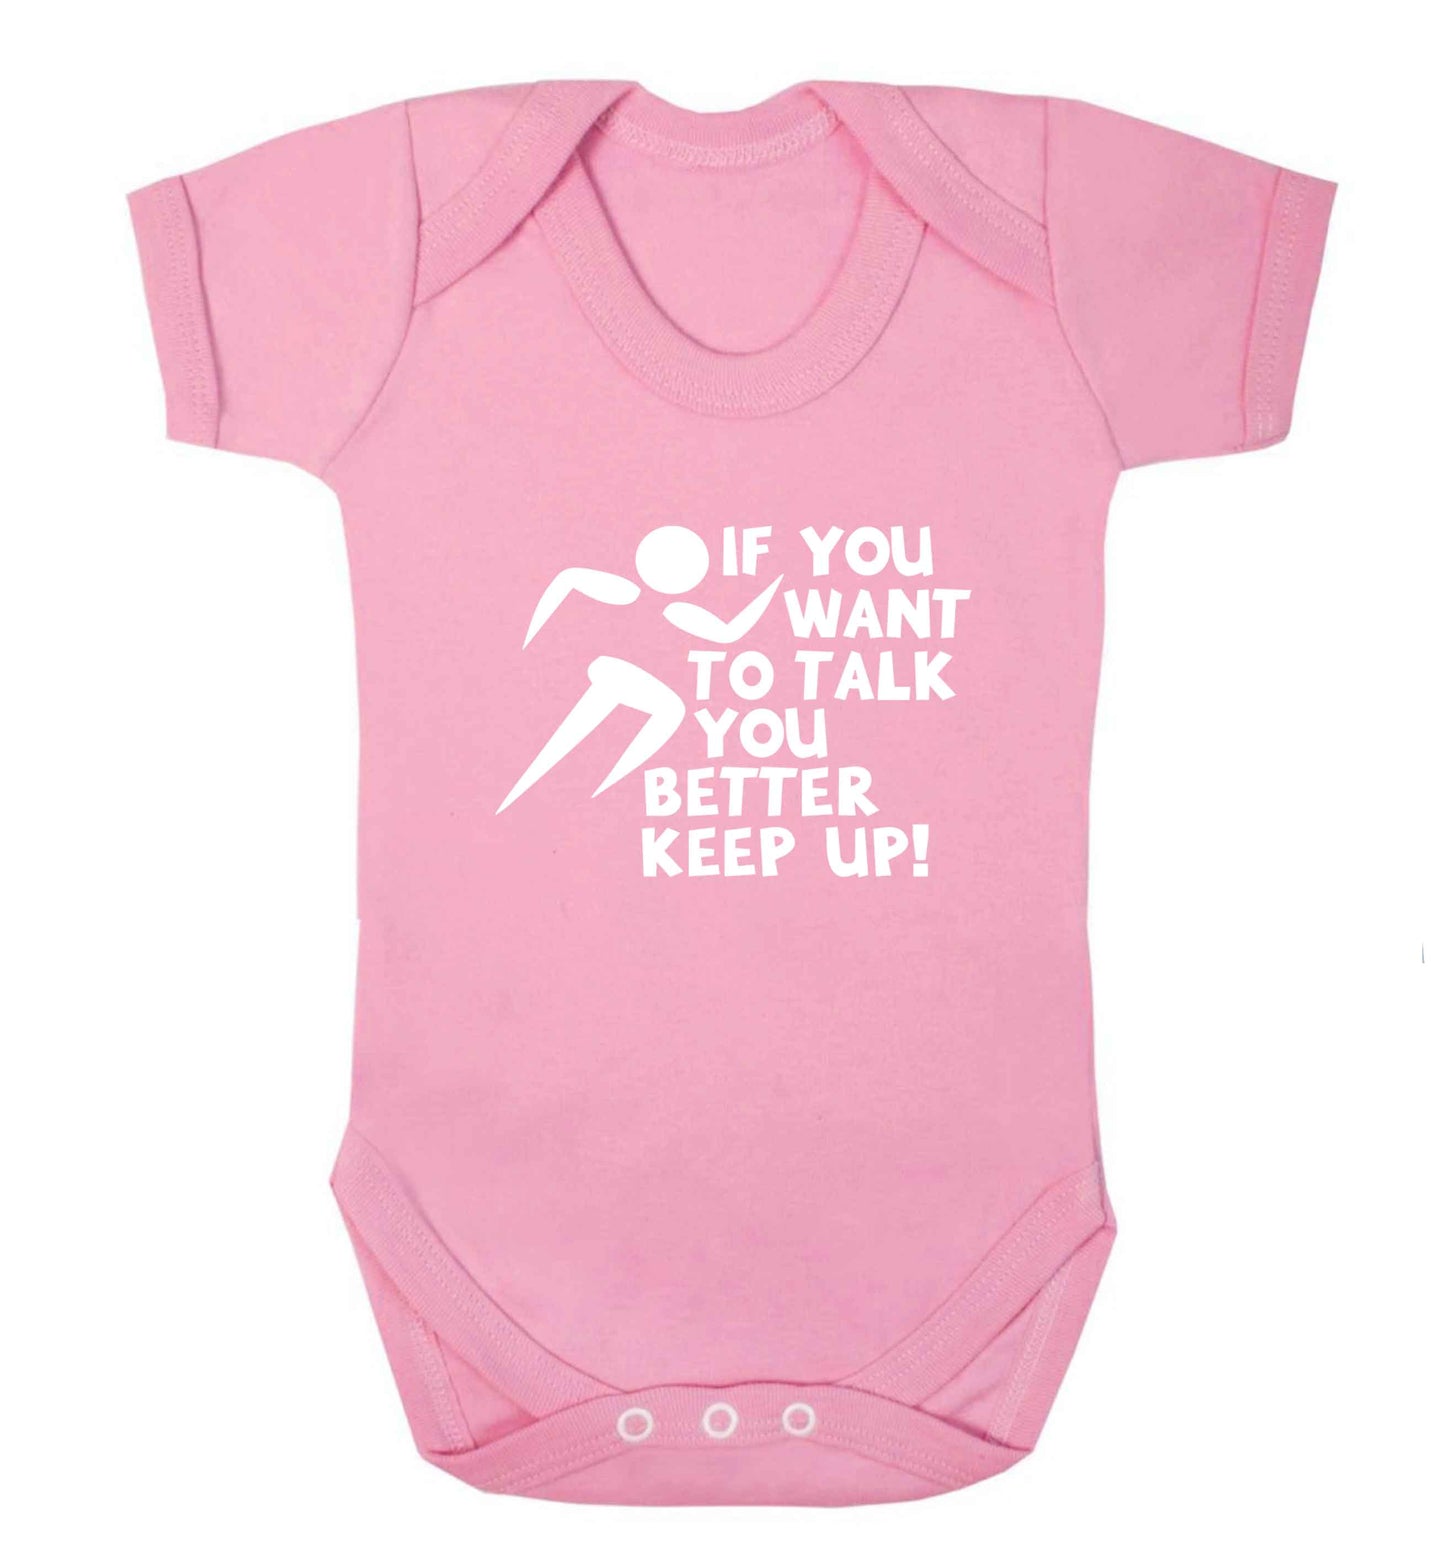 If you want to talk you better keep up! baby vest pale pink 18-24 months